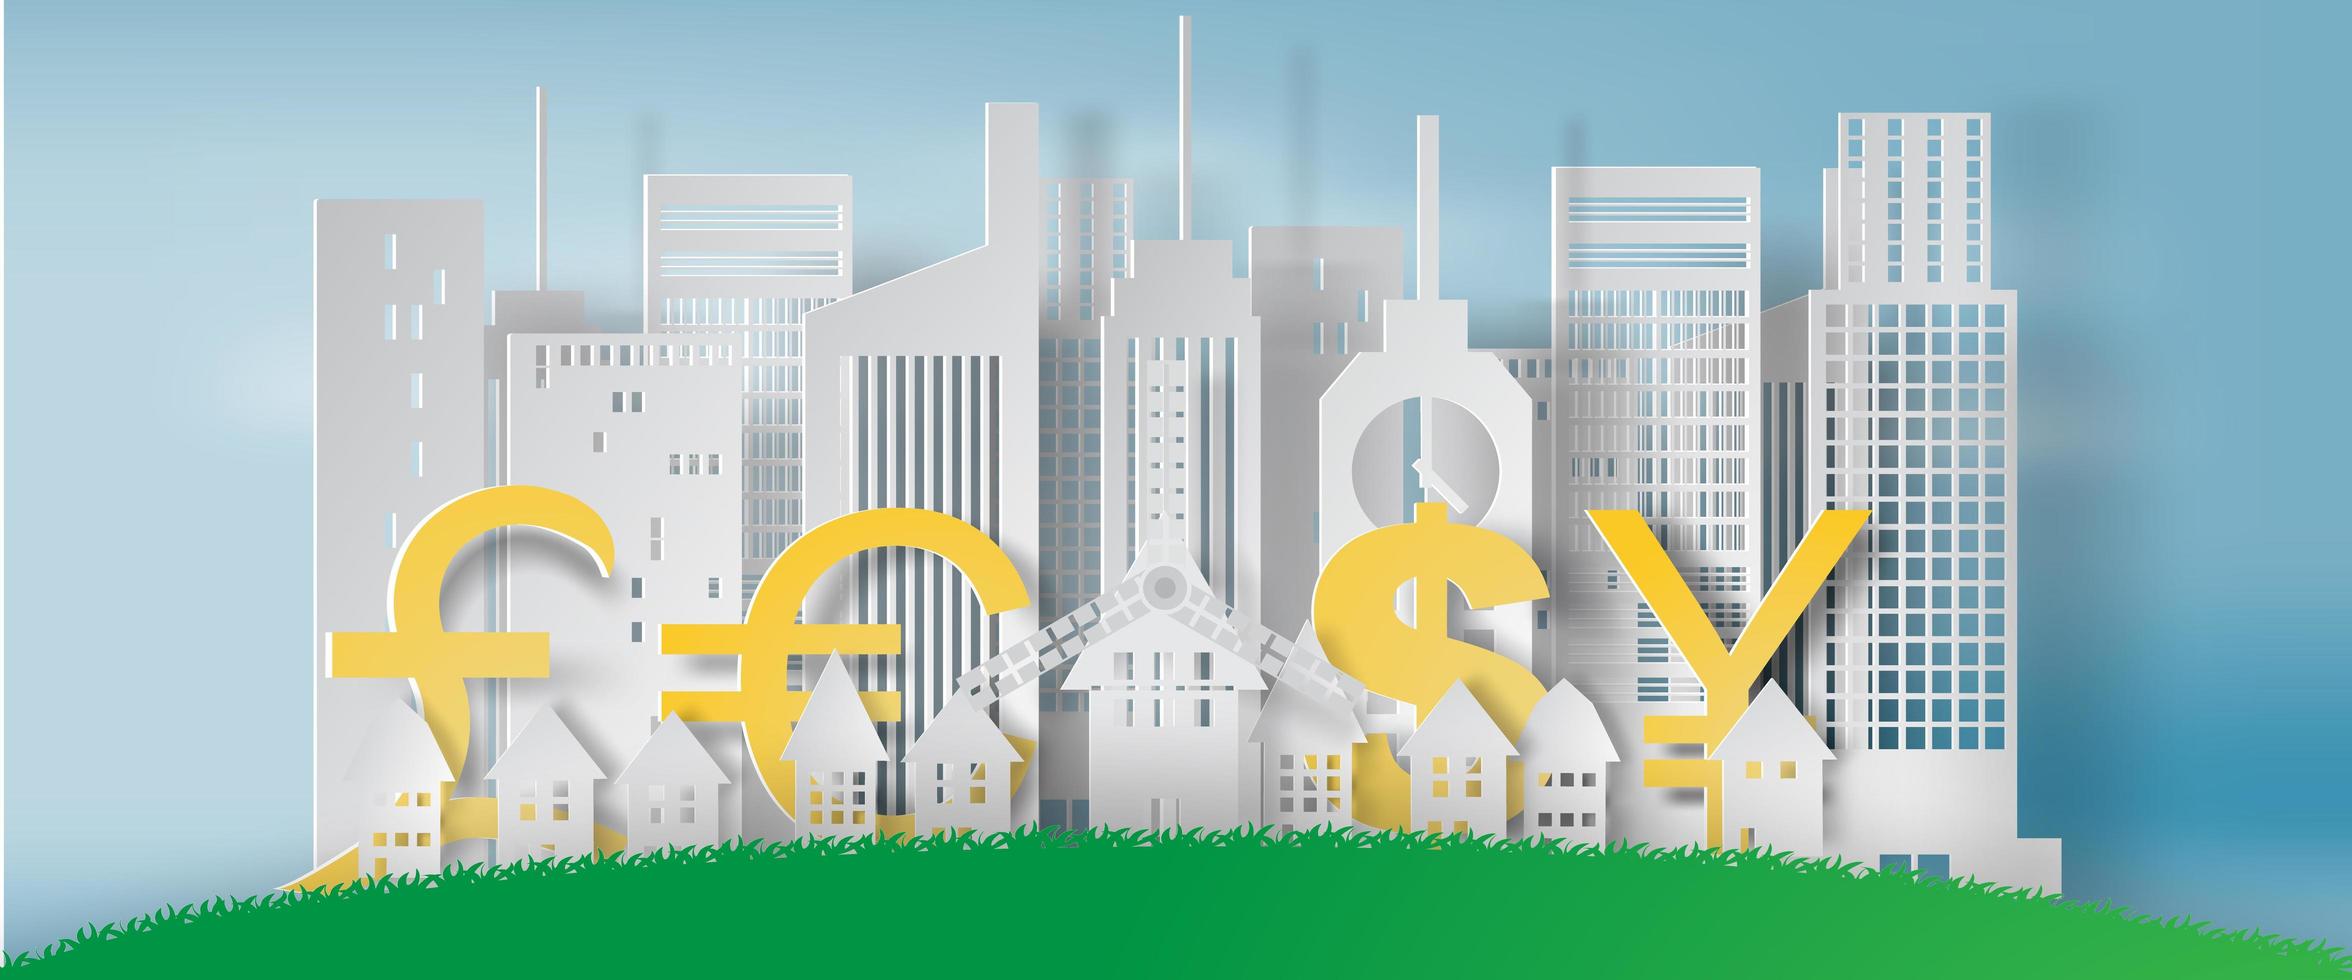 Paper Art Cityscape with Currency Shapes  vector